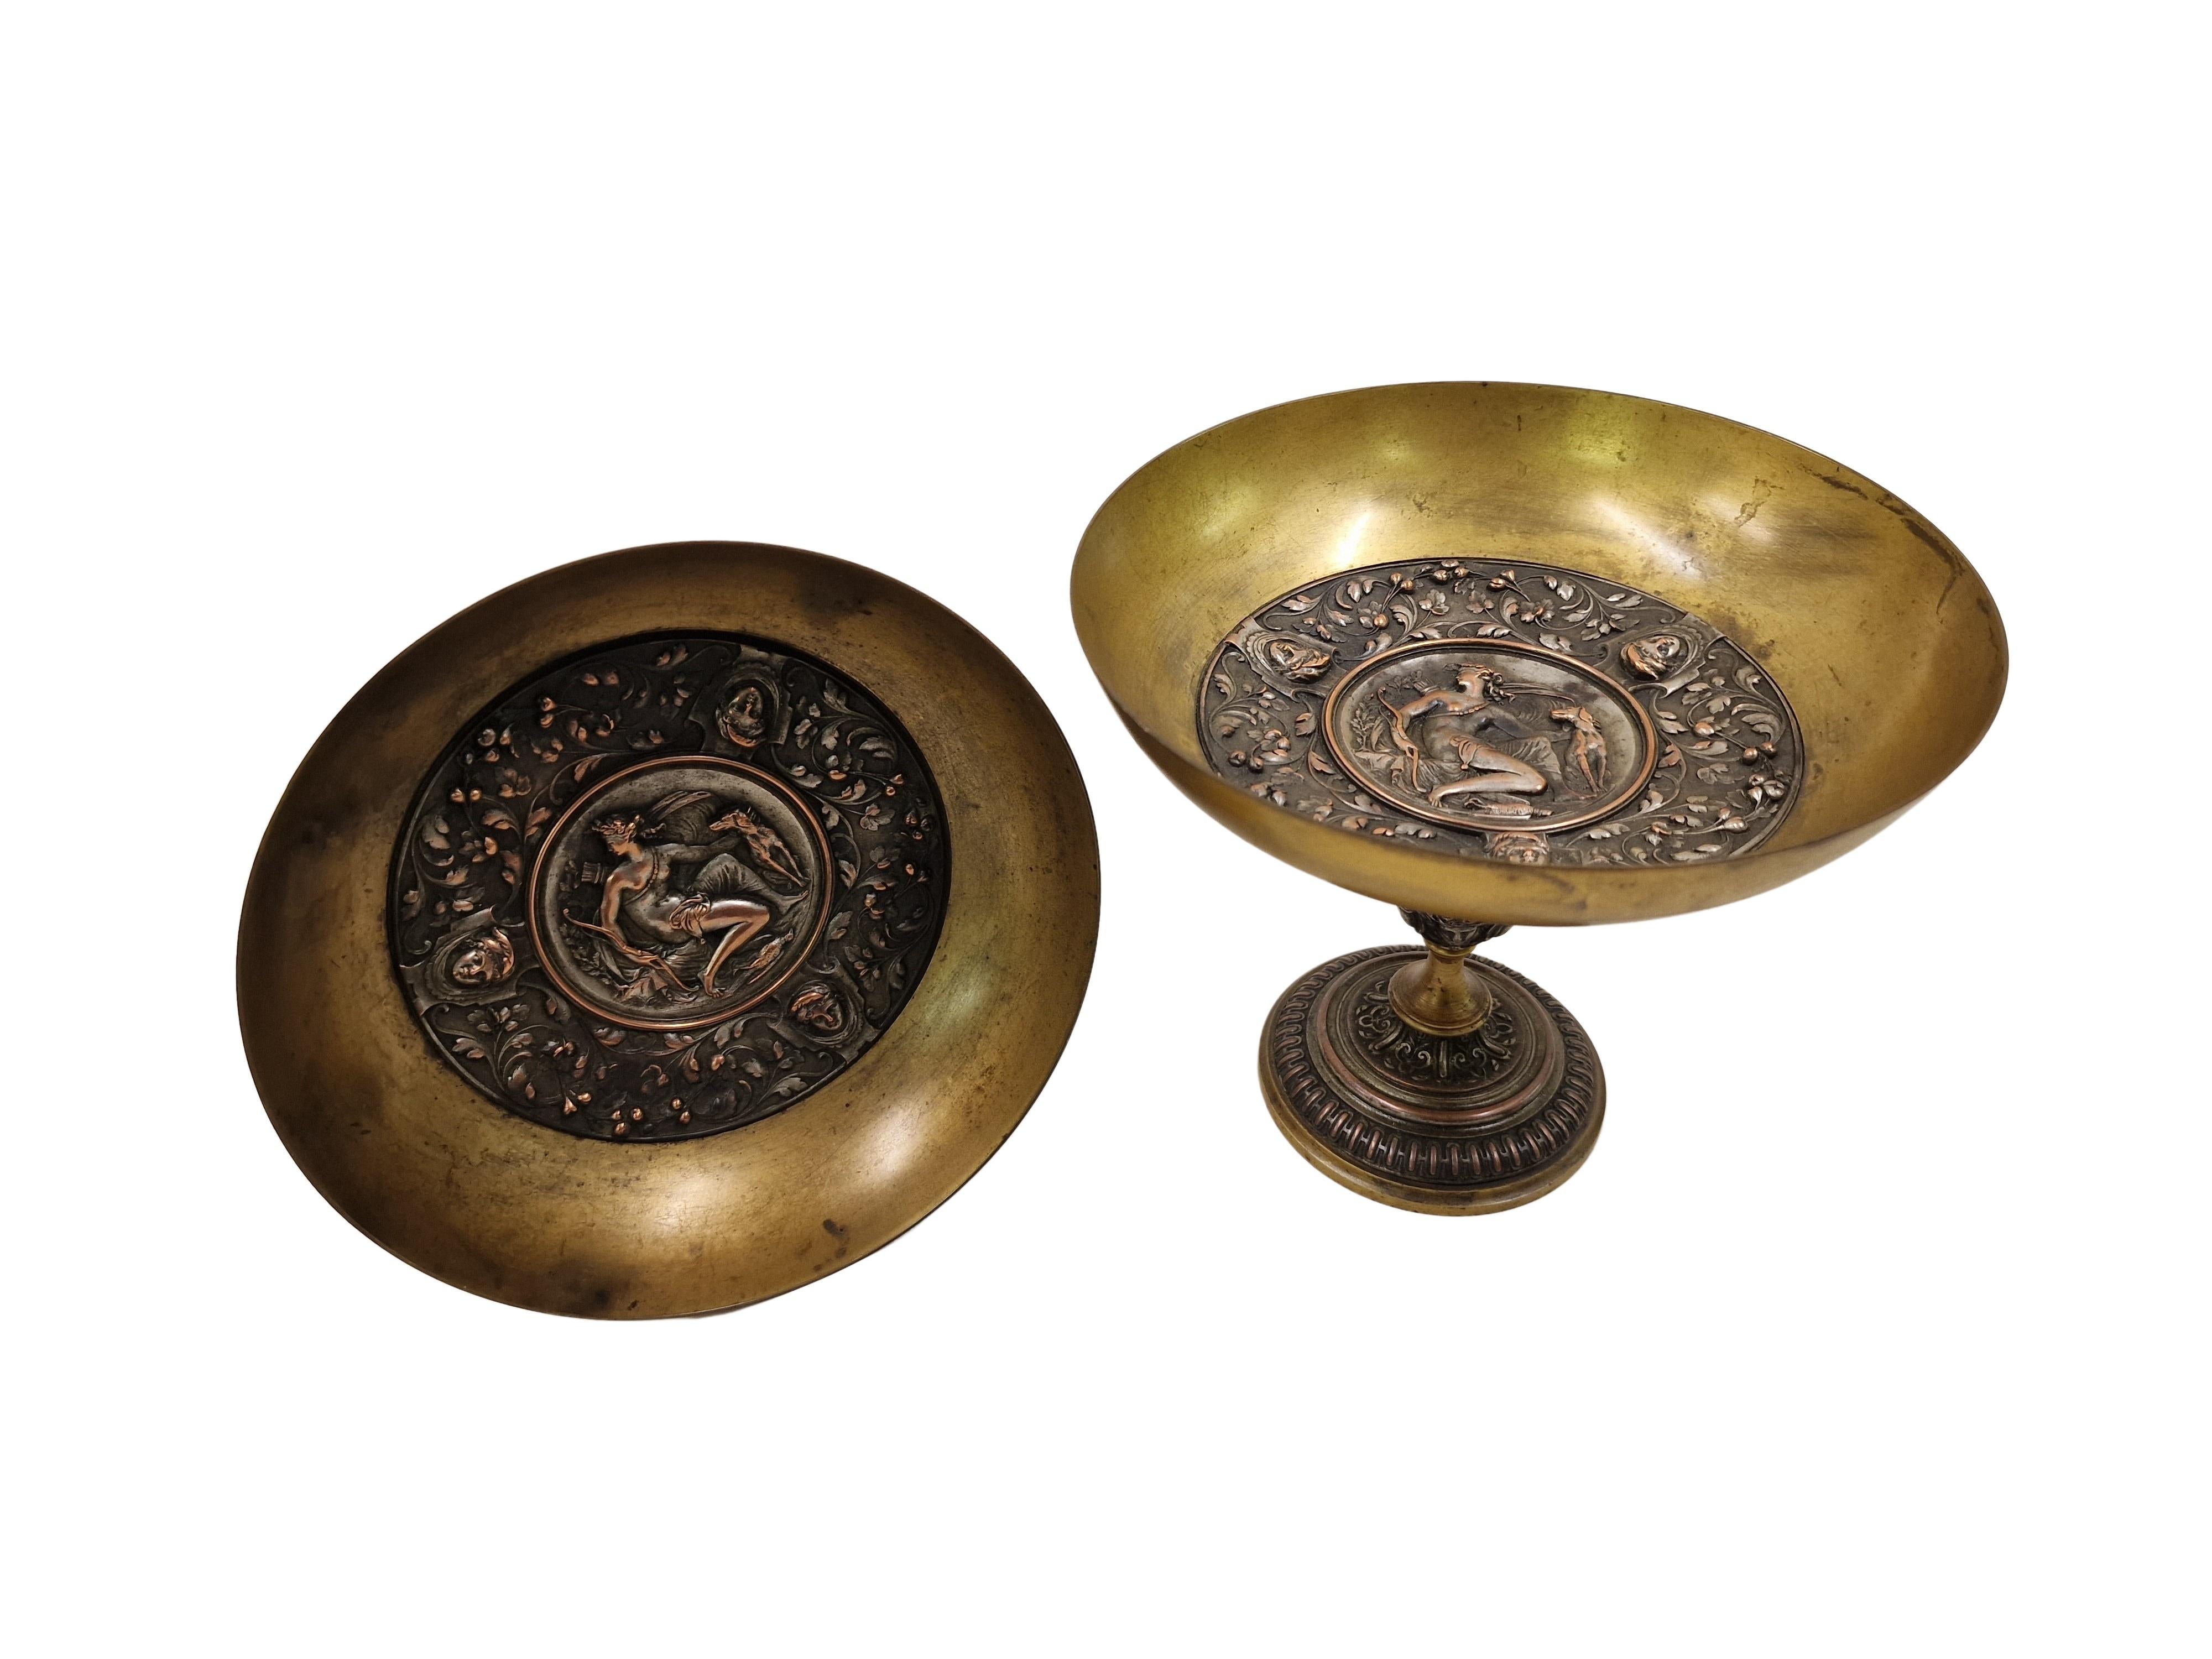 Exceptional pair of late 18th century fire-gilt bronze centerpieces. Broad bowl shape, with specially designed central reliefs in the middle of the tray. These show Diana, the goddess of hunt, with her attributes. Faces that are particularly finely